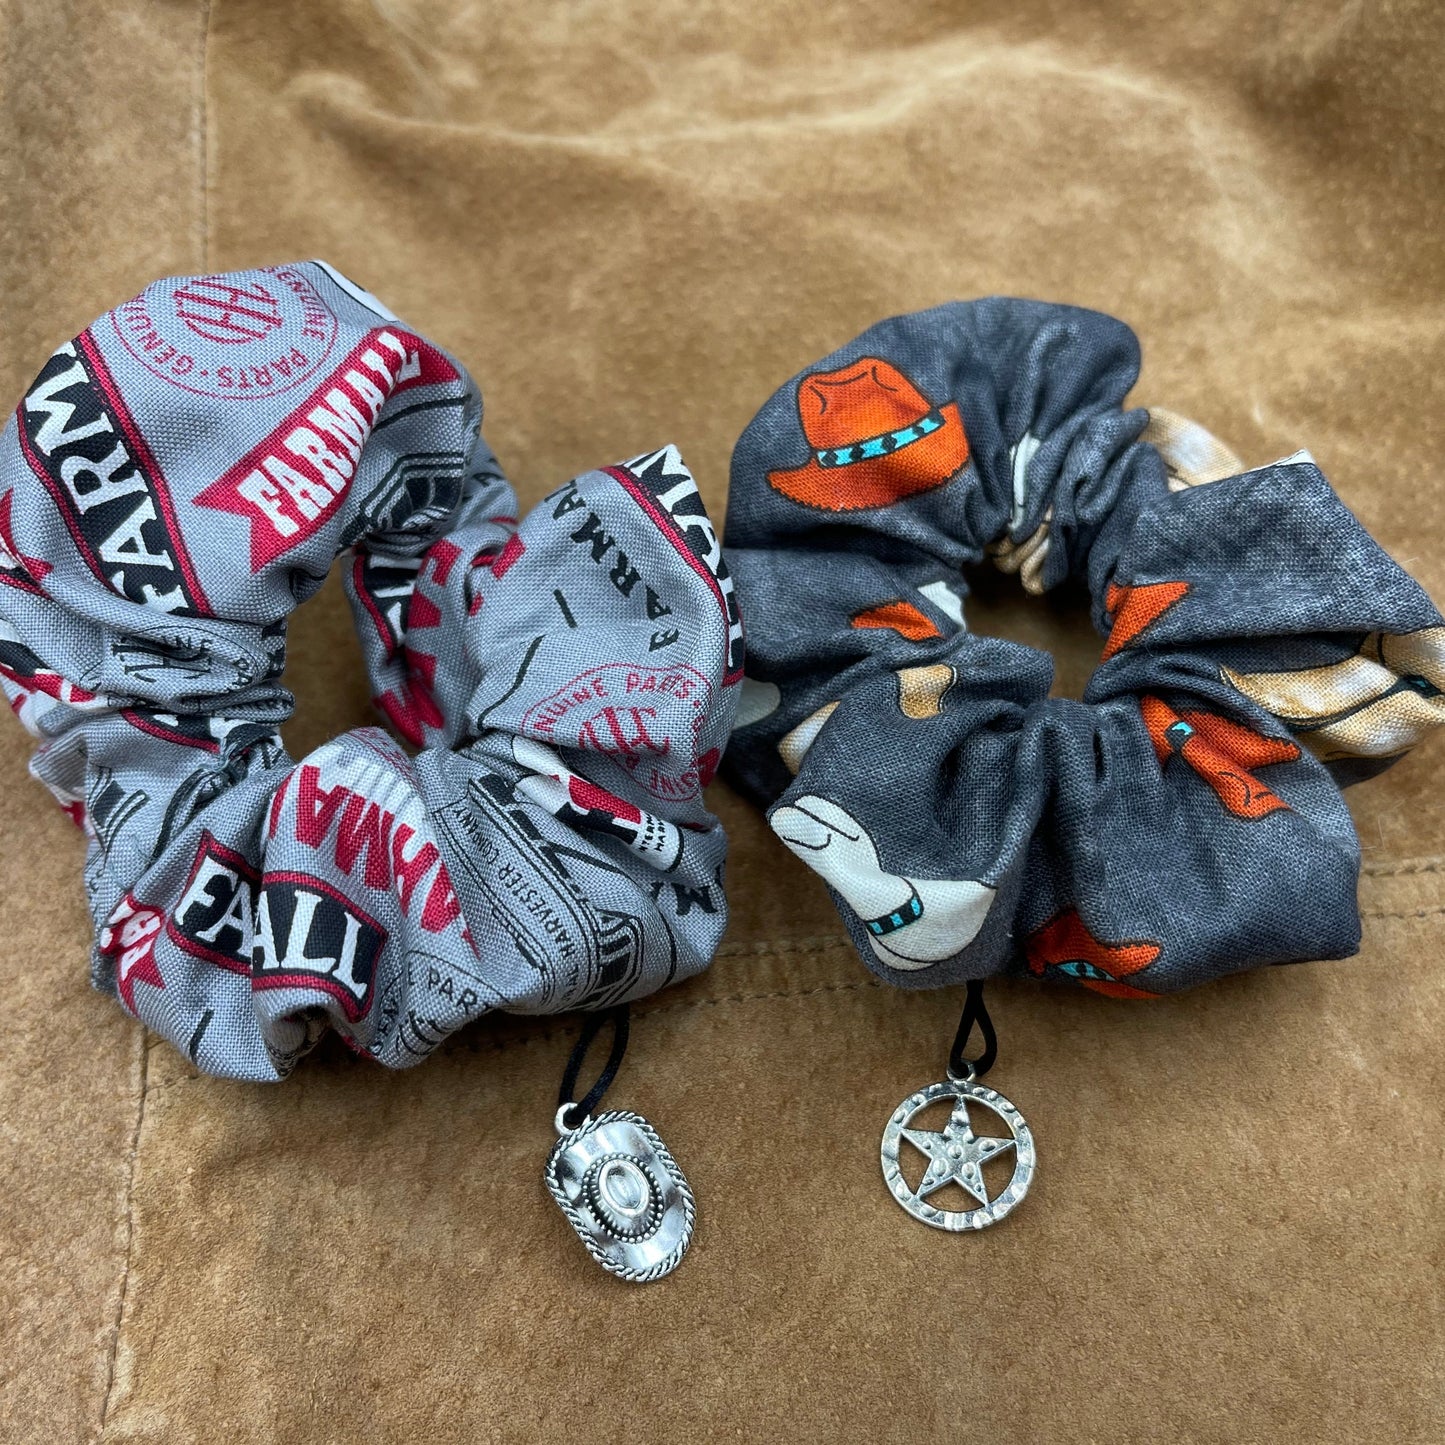 Two scrunchies side by side against a brown leather jacket. The left scrunchie is grey with a pattern a farmail logos. A charm shaped like a cowboy hat is attached to the fabric. The right scrunchie is black with a pattern of cowboy hats. Attached to the fabric is a charm shaped like a sheriff's hat.